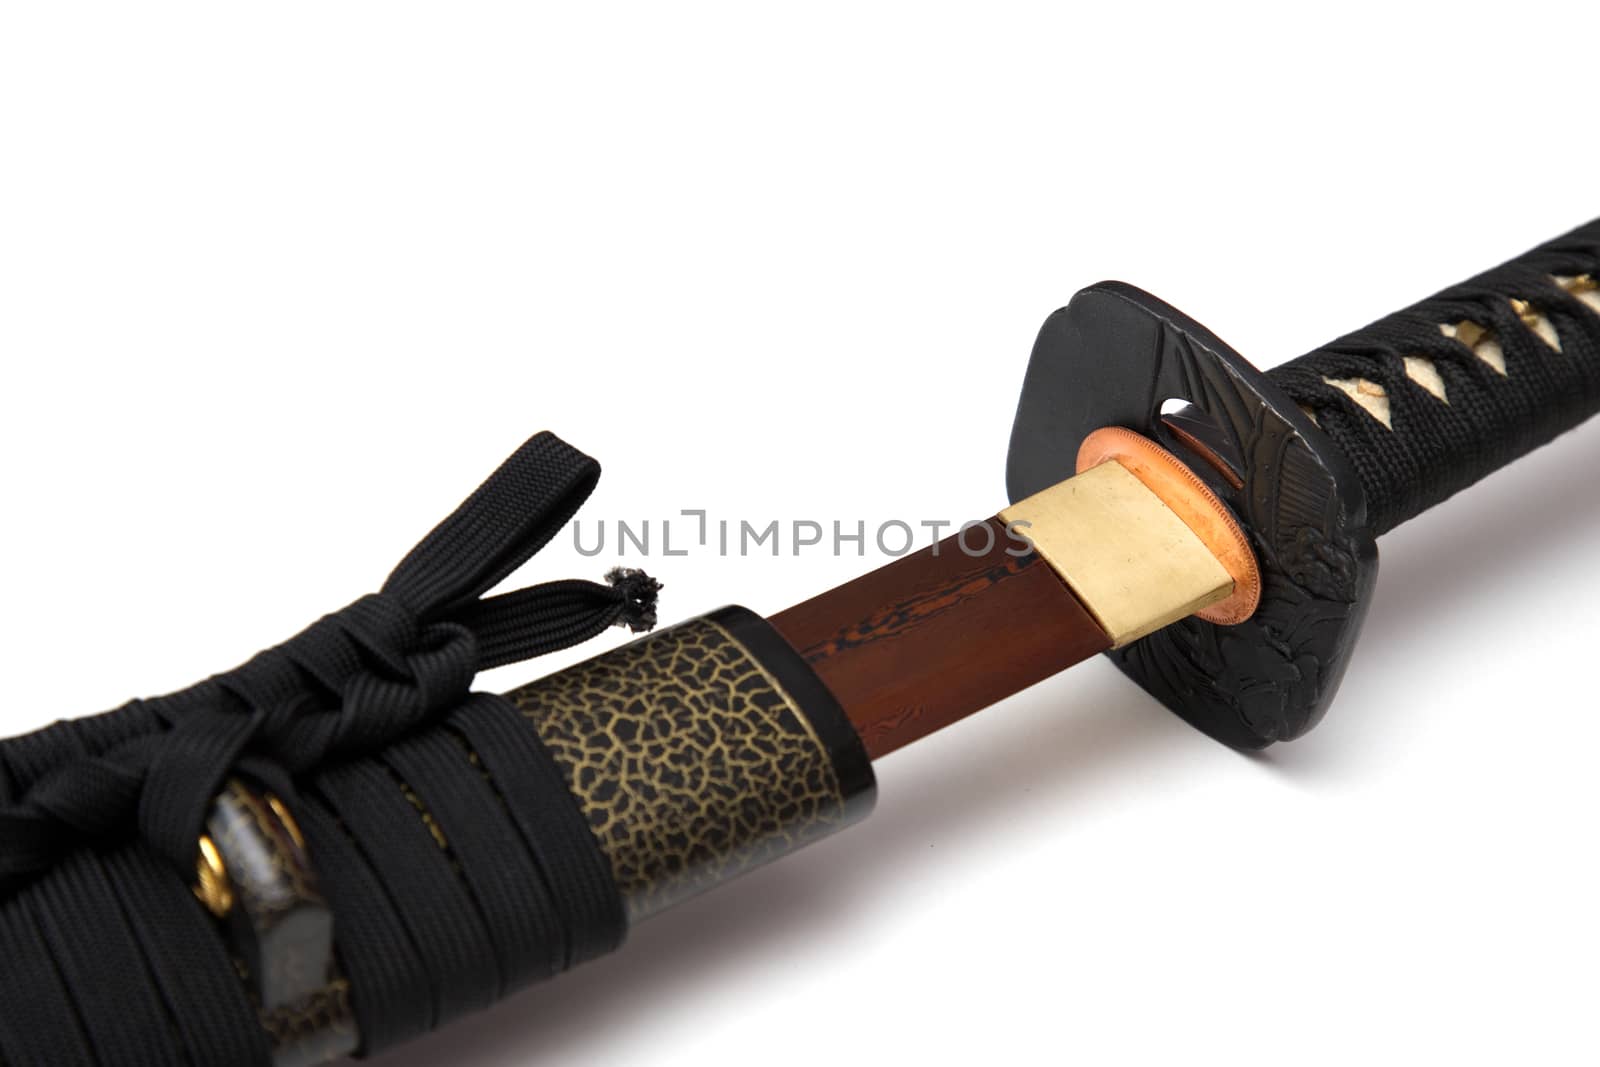 Red blade Japanese sword  black cord with  full textured scabbard  isolated in white background.